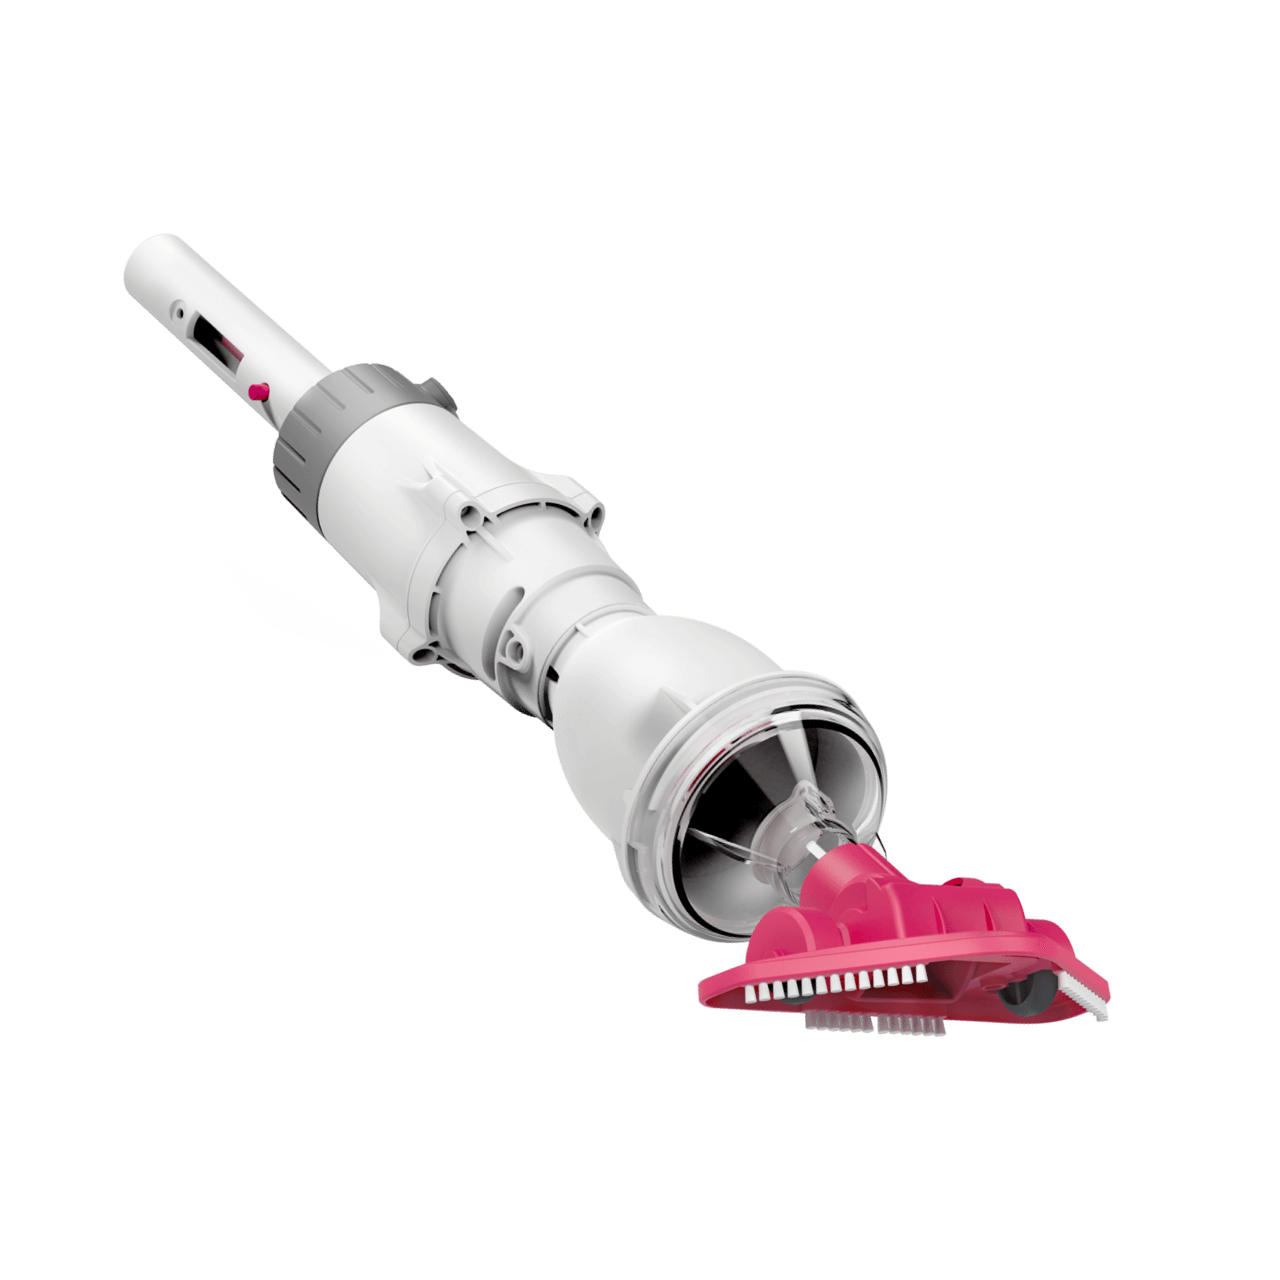 BWT BC02 pool vacuum cleaner white with pink attachment